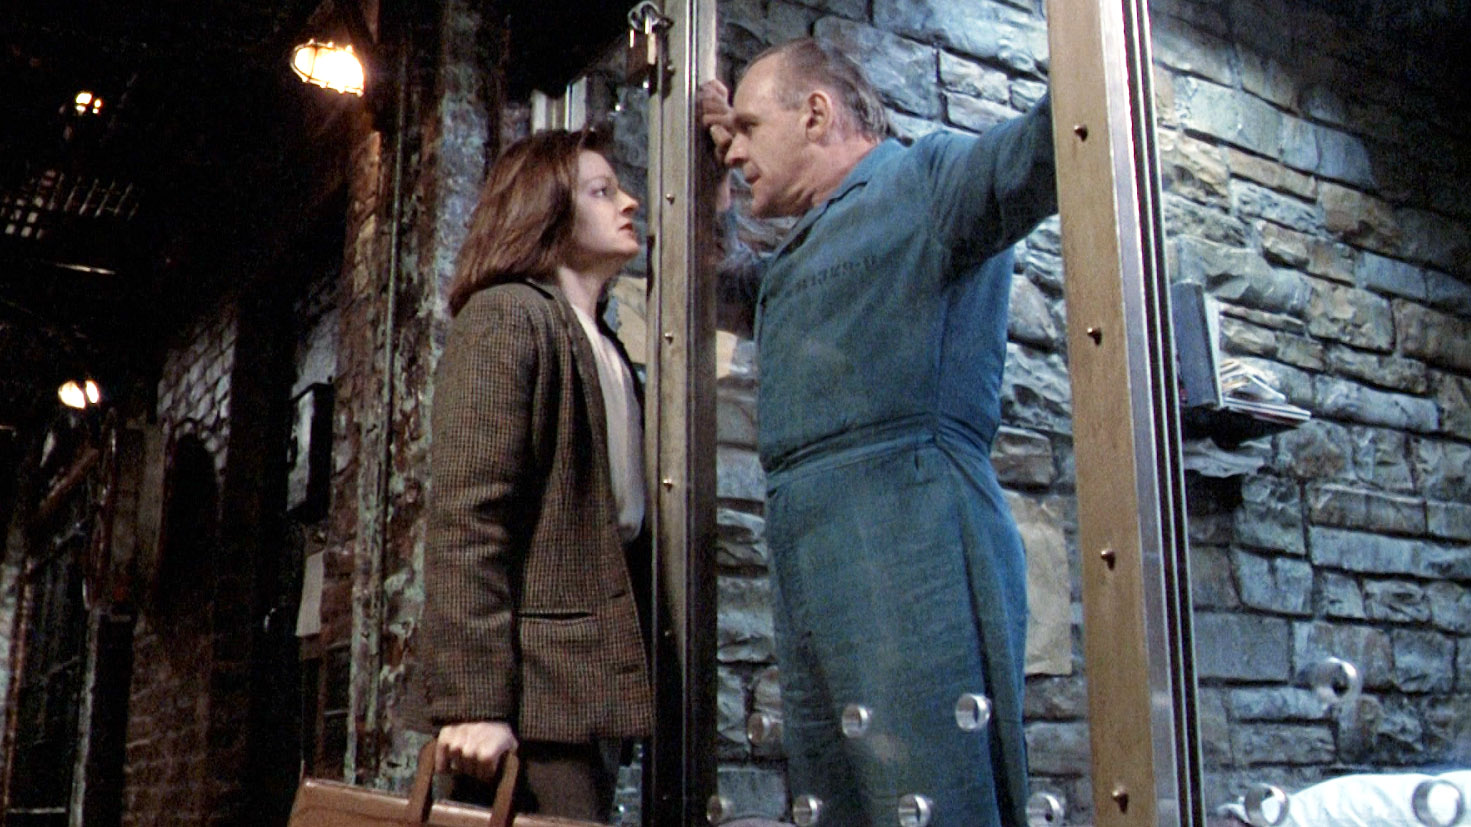 The 10 creepiest moments from The Silence of the Lambs | GamesRadar+